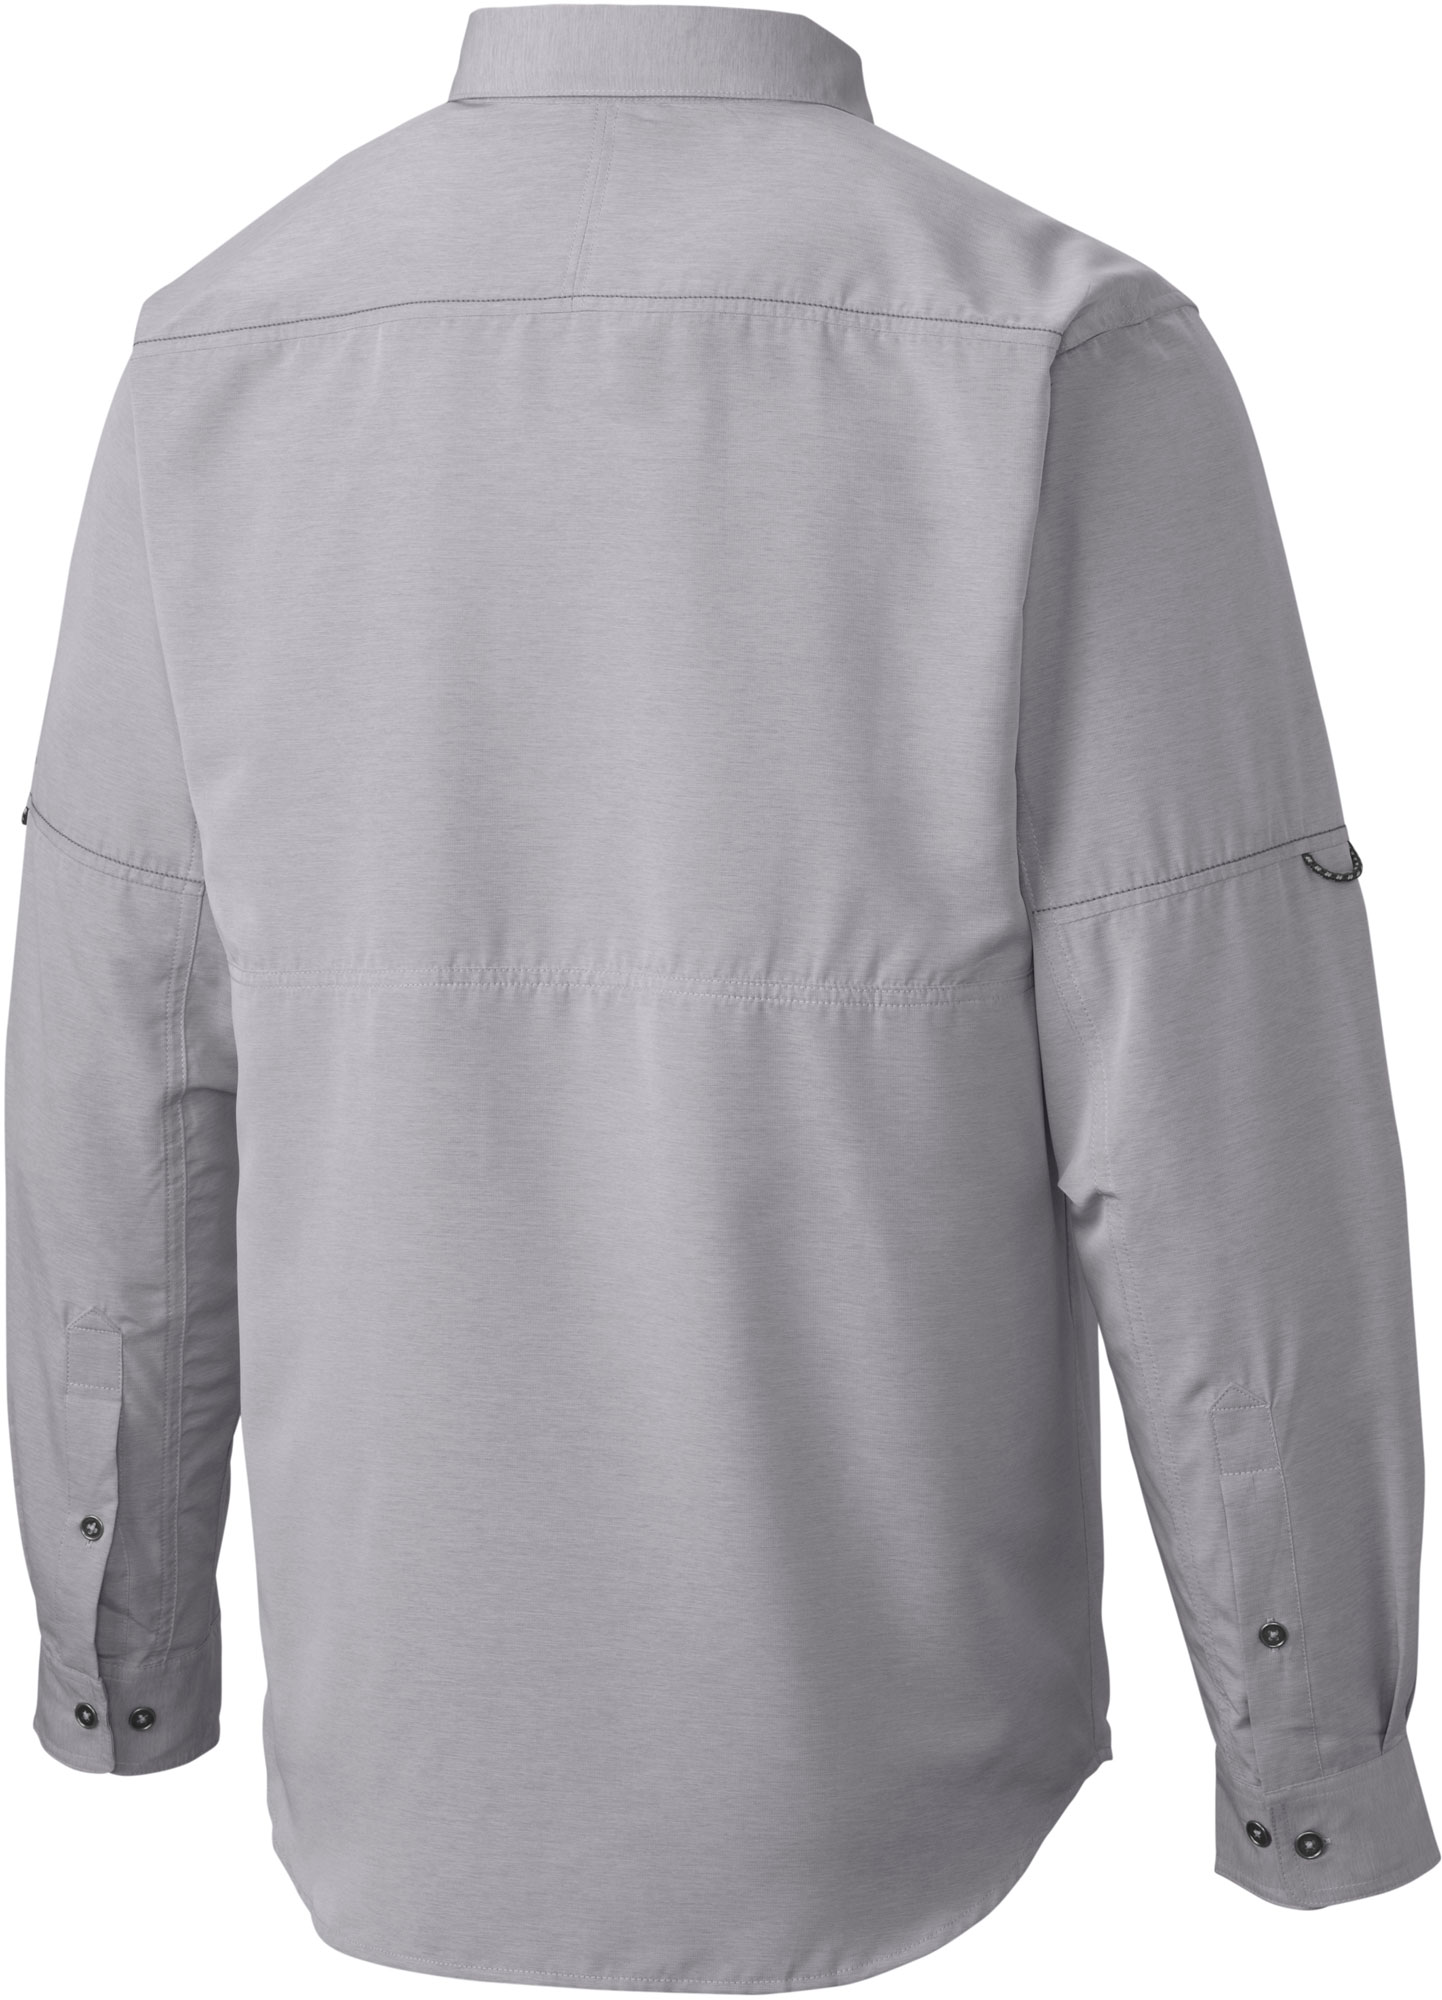 Men's shirt with long sleeves